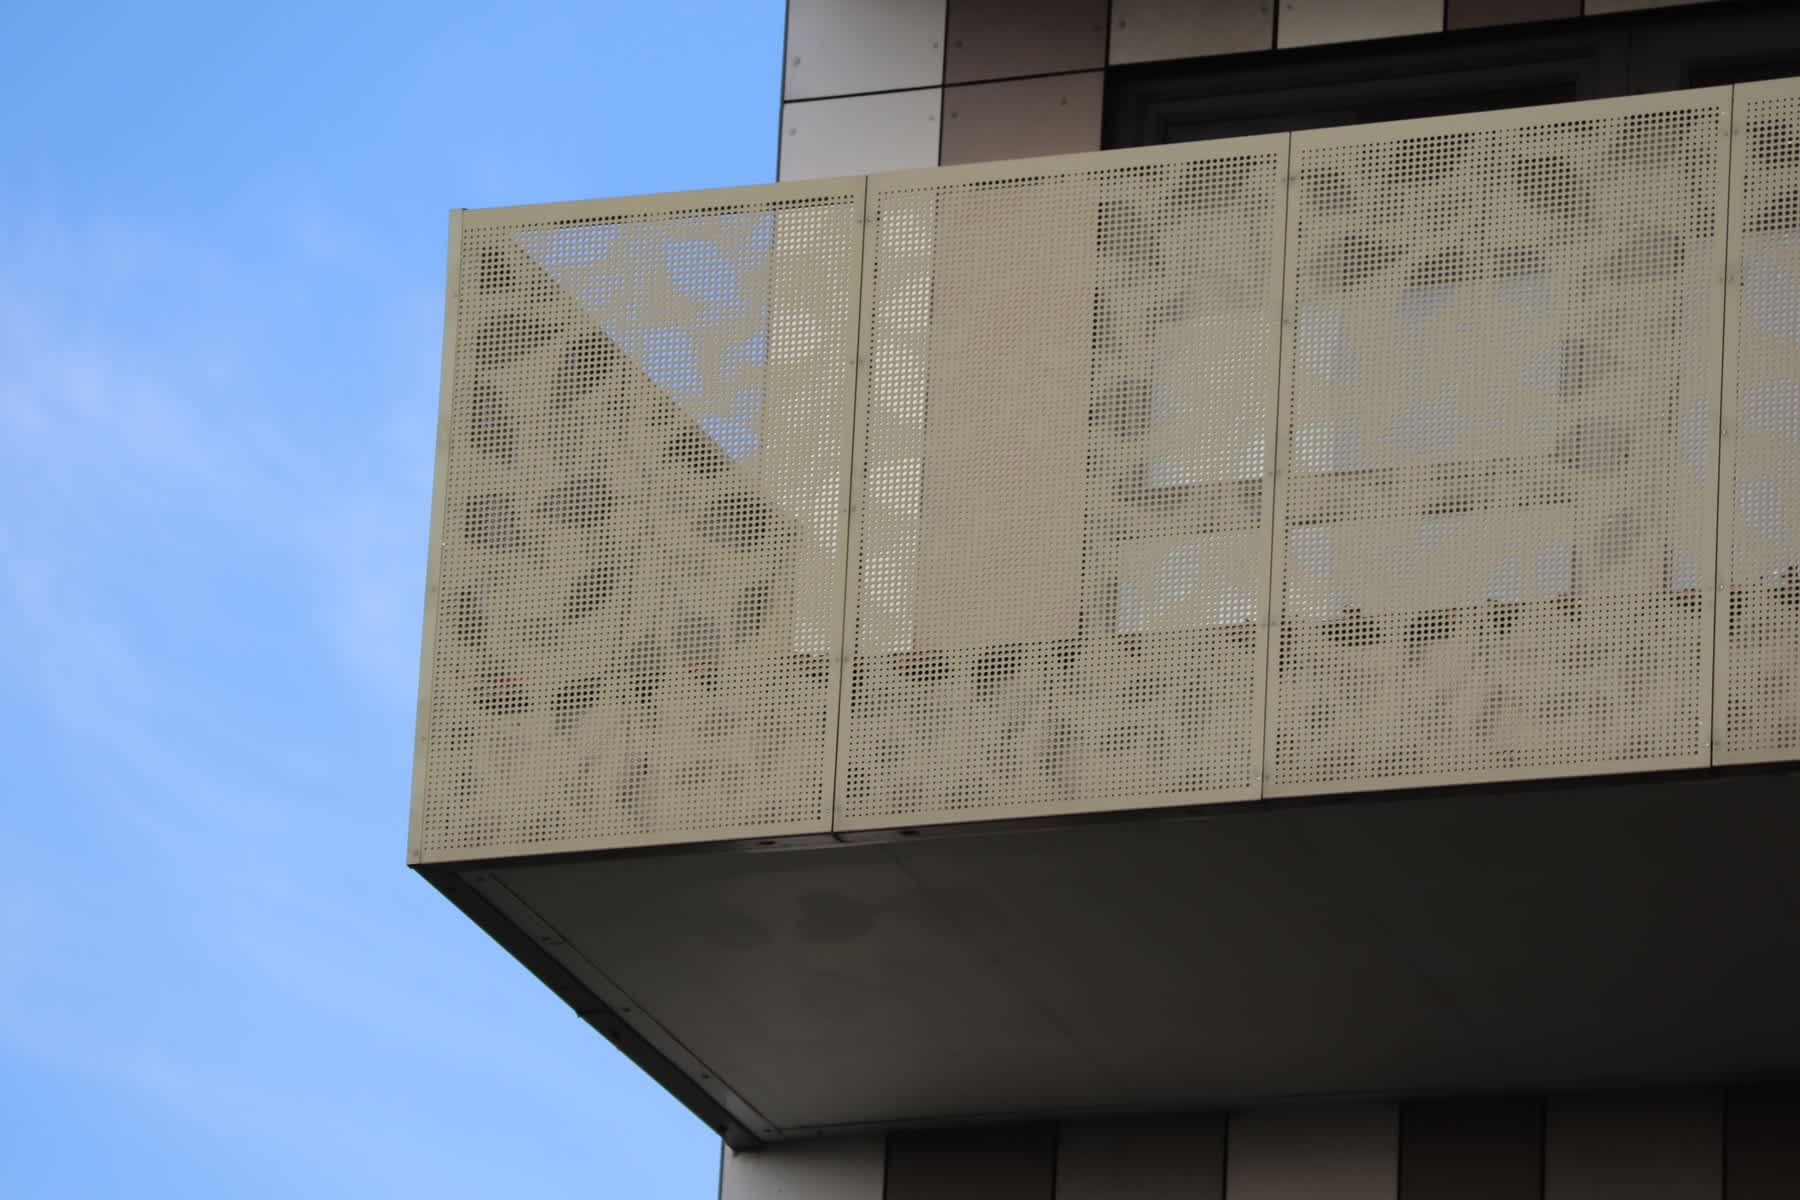 perforated balustrades with leaf pattern perforated into metal panels